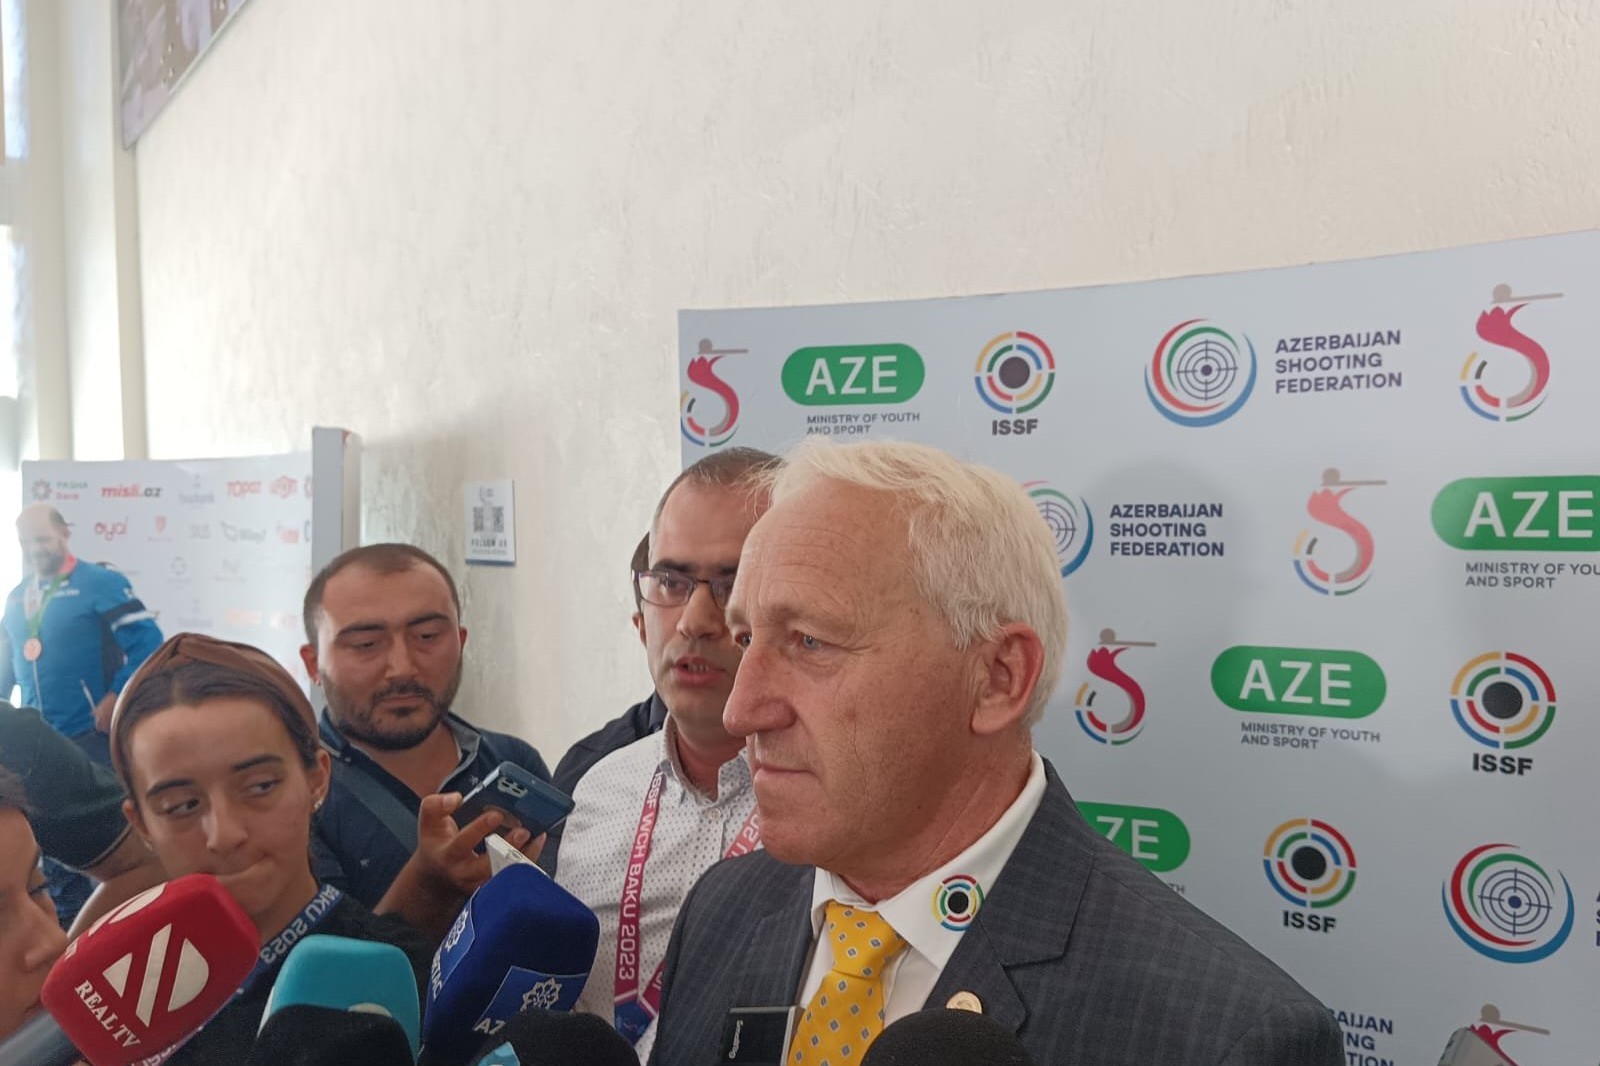 ISSF General Secretary: “I don’t expect The World Championship to be held at this level again”